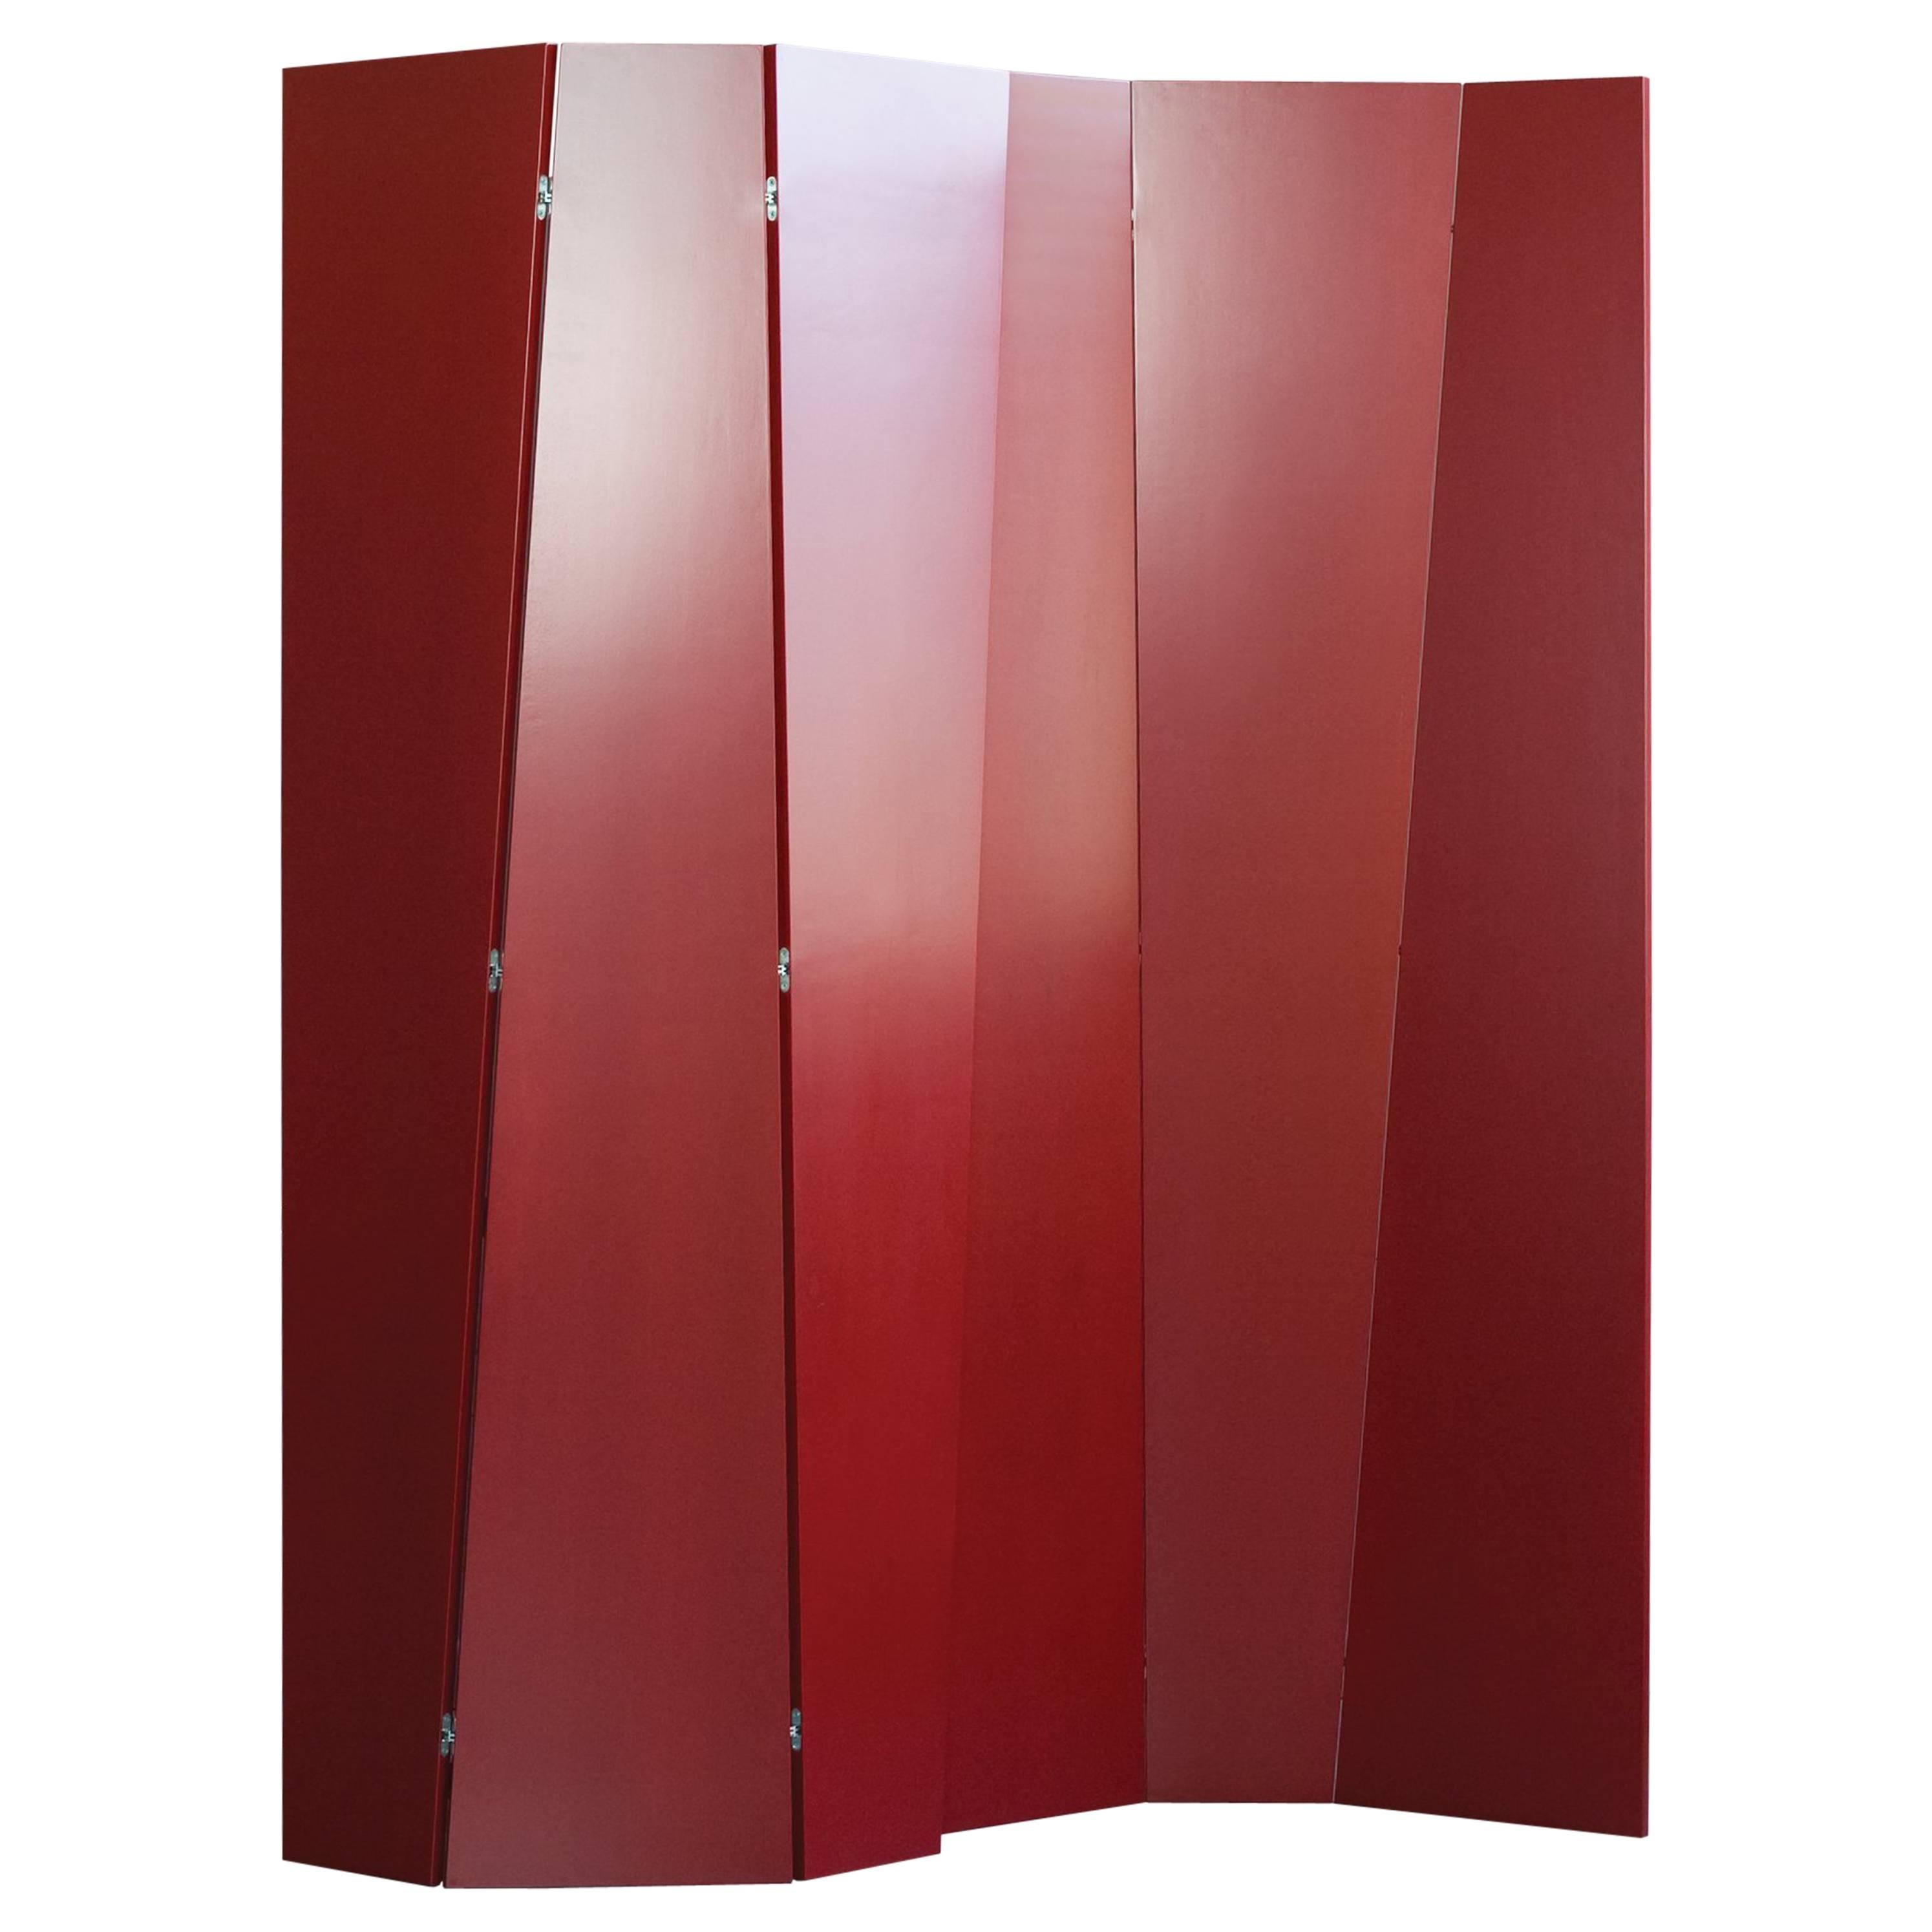 Tri-Fold Opaque Lacquer Folding Screen / Room Divider